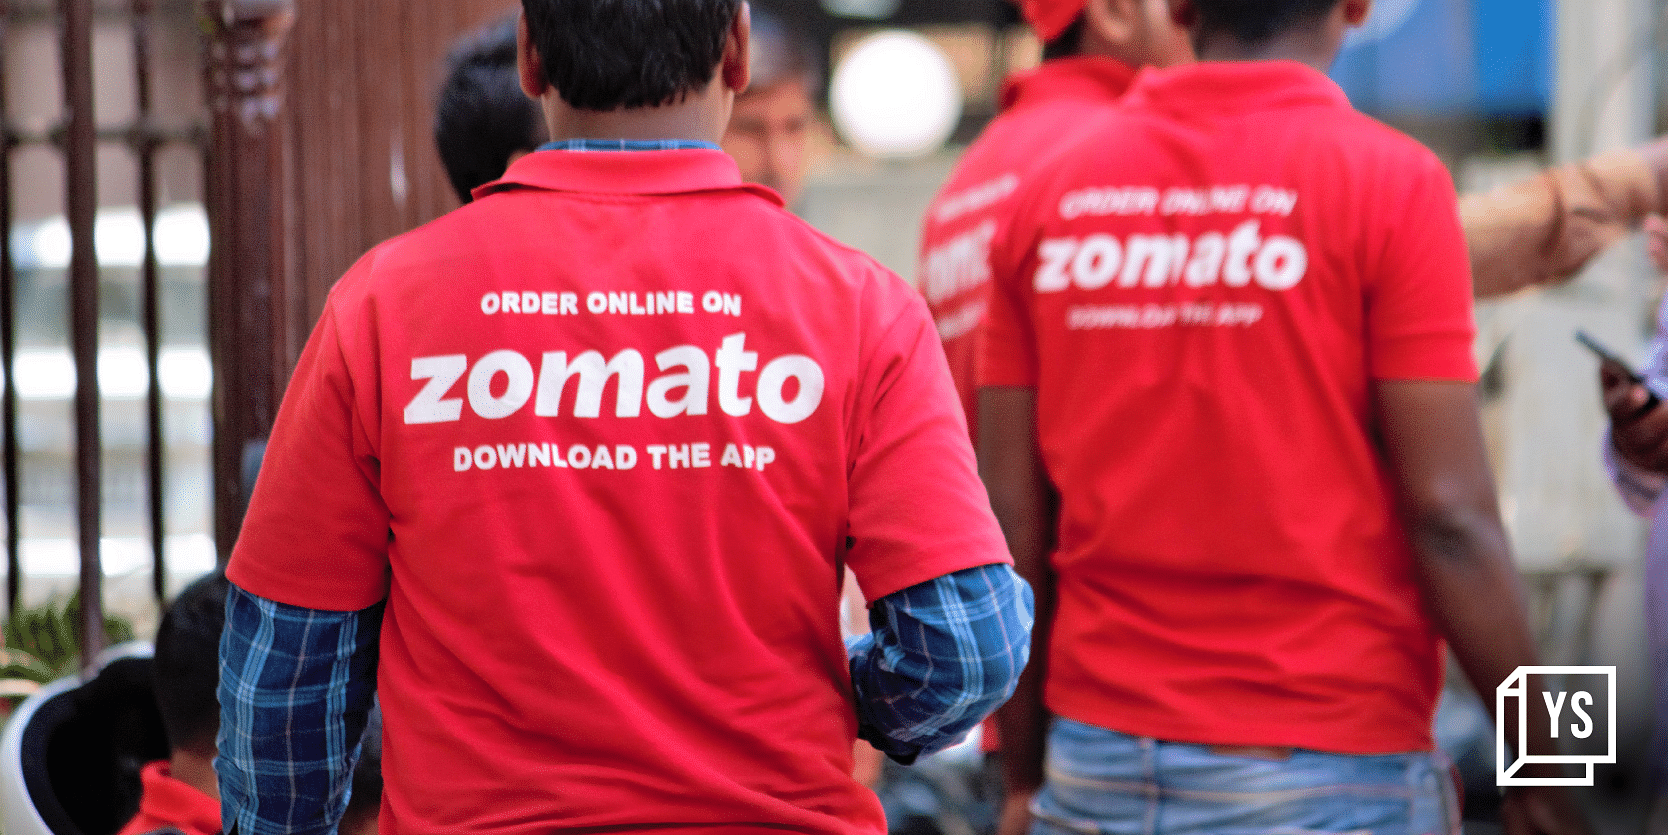 You are currently viewing Zomato pilots B2B logistics service for ecommerce players: Report